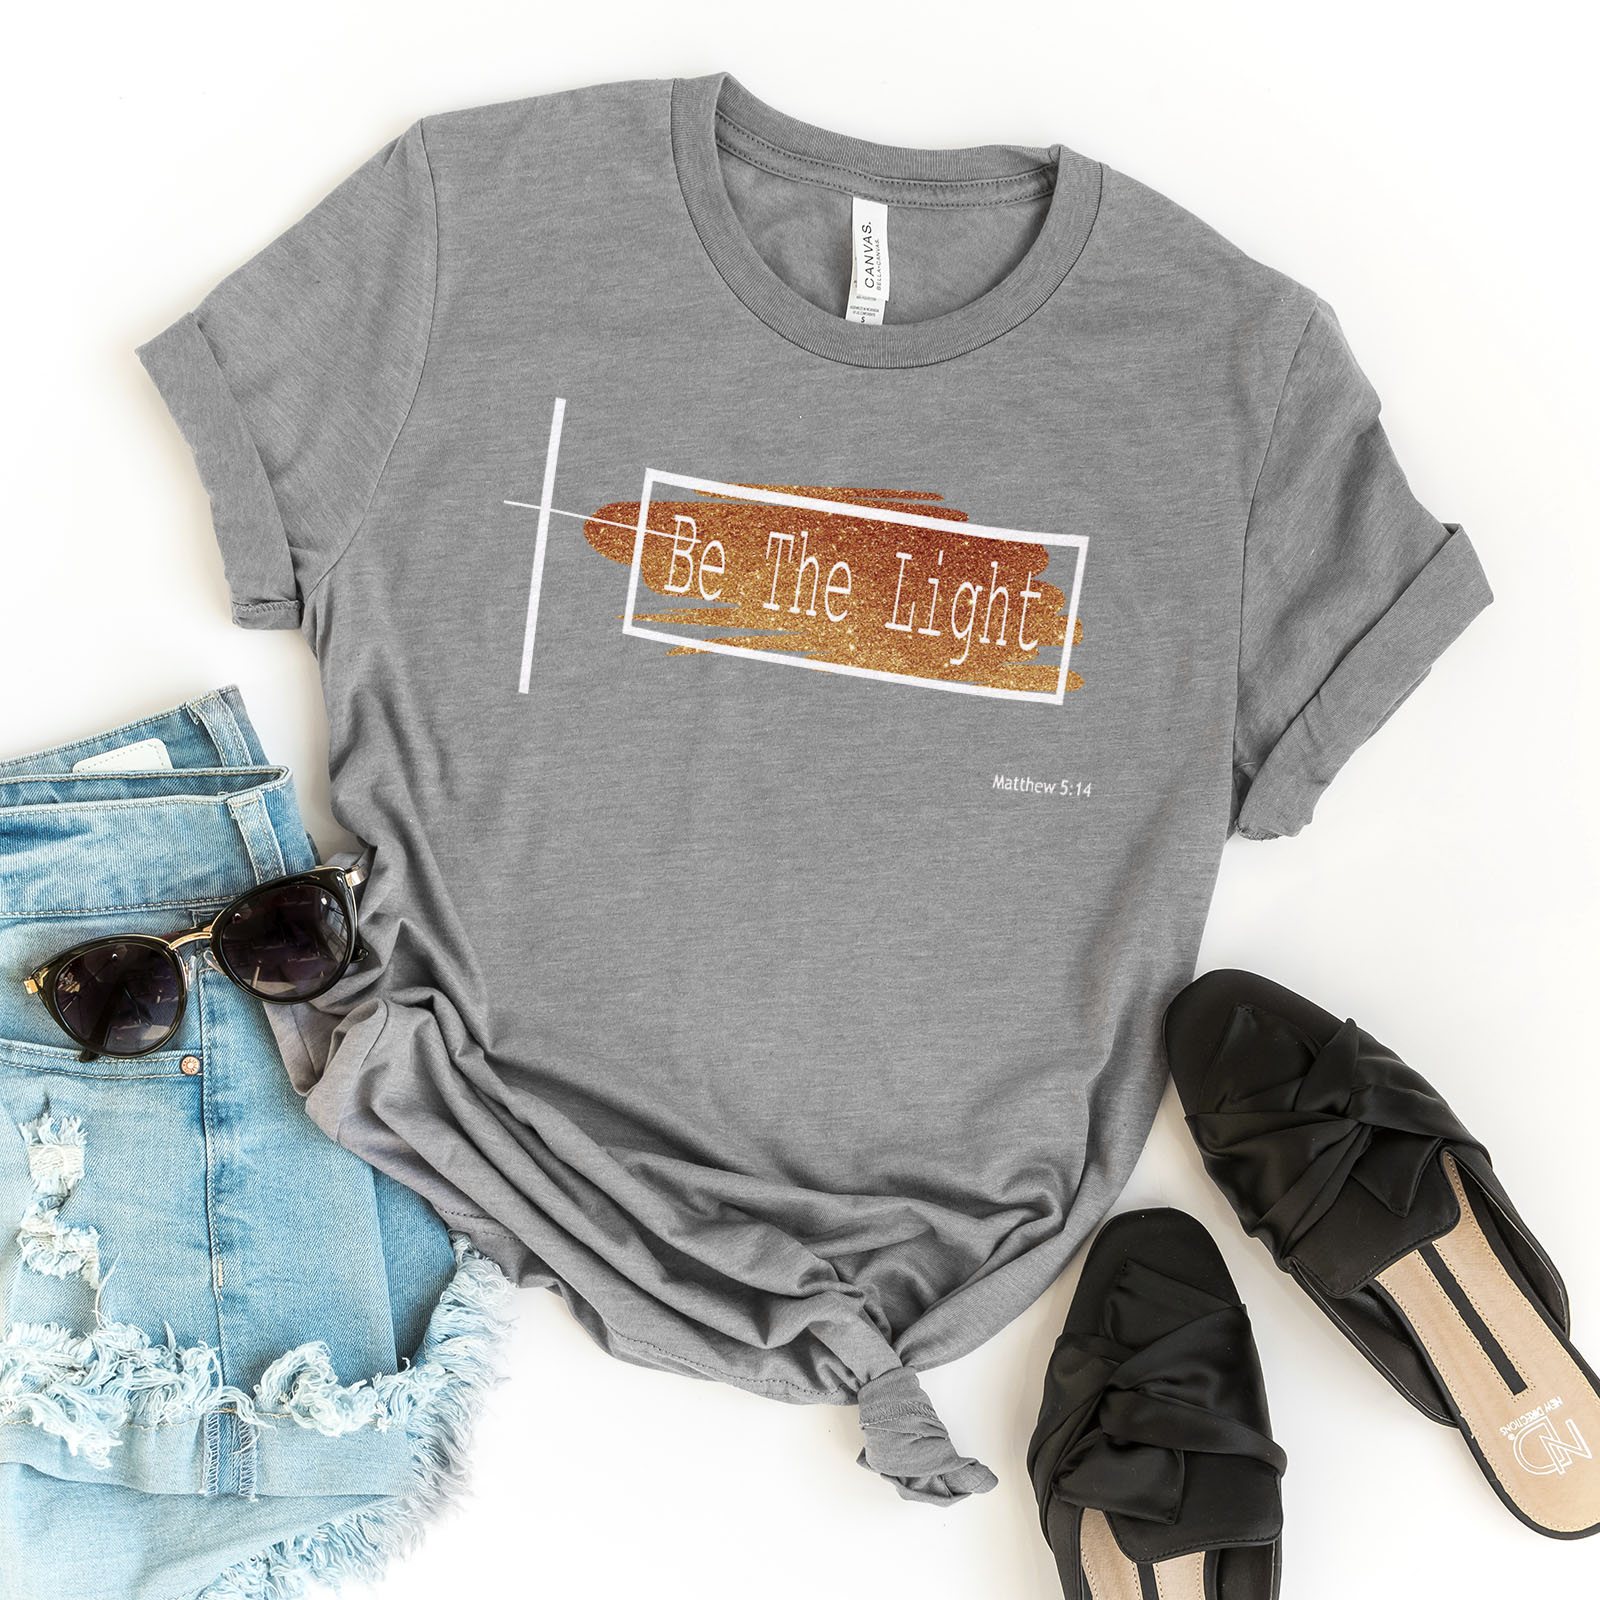 Be The Light Tee Shirts For Women - Christian Shirts for Women - Religious Tee Shirts